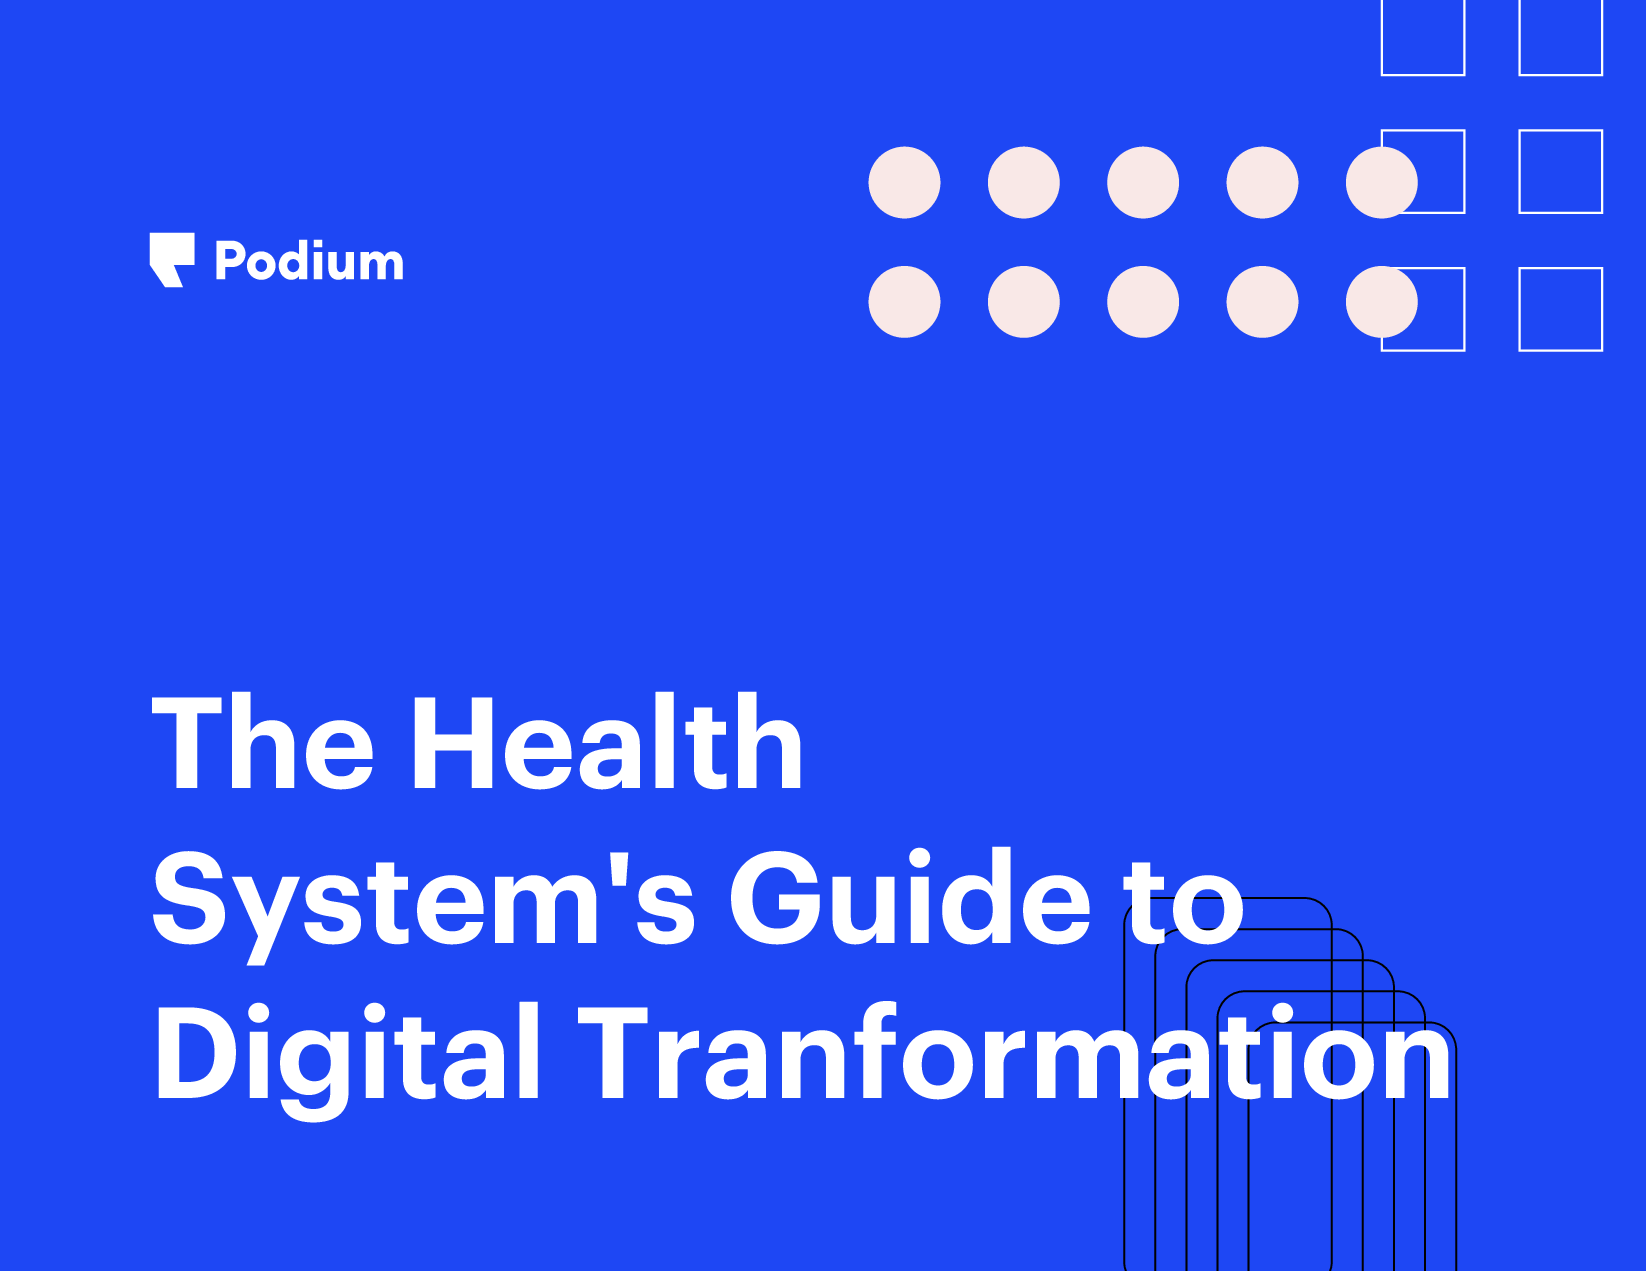 The Health System’s Guide to Digital Transformation